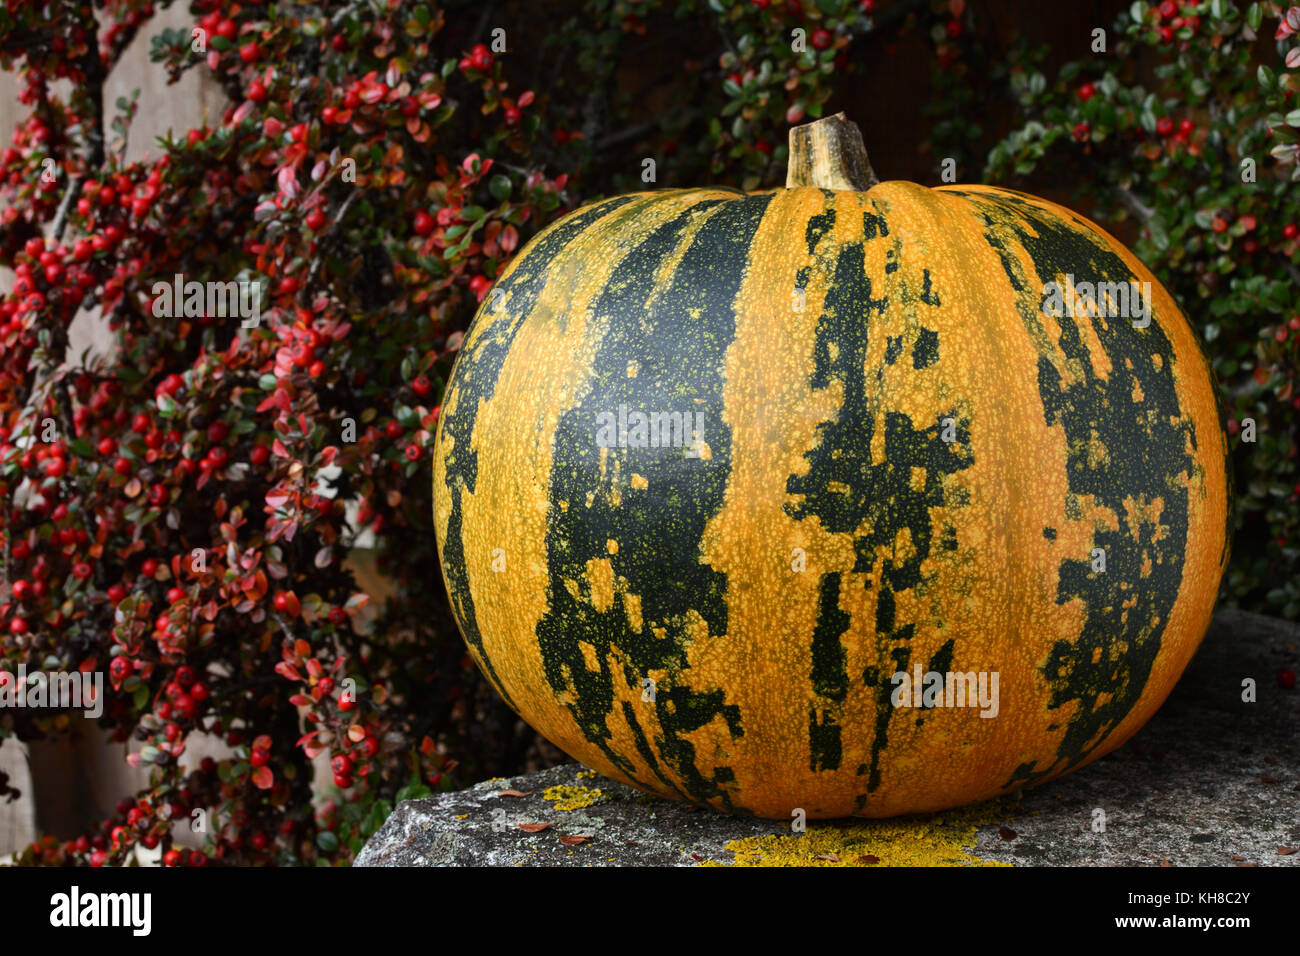 Large pumpkin with bold green and yellow stripes, surrounded by autumn cotoneaster berries Stock Photo